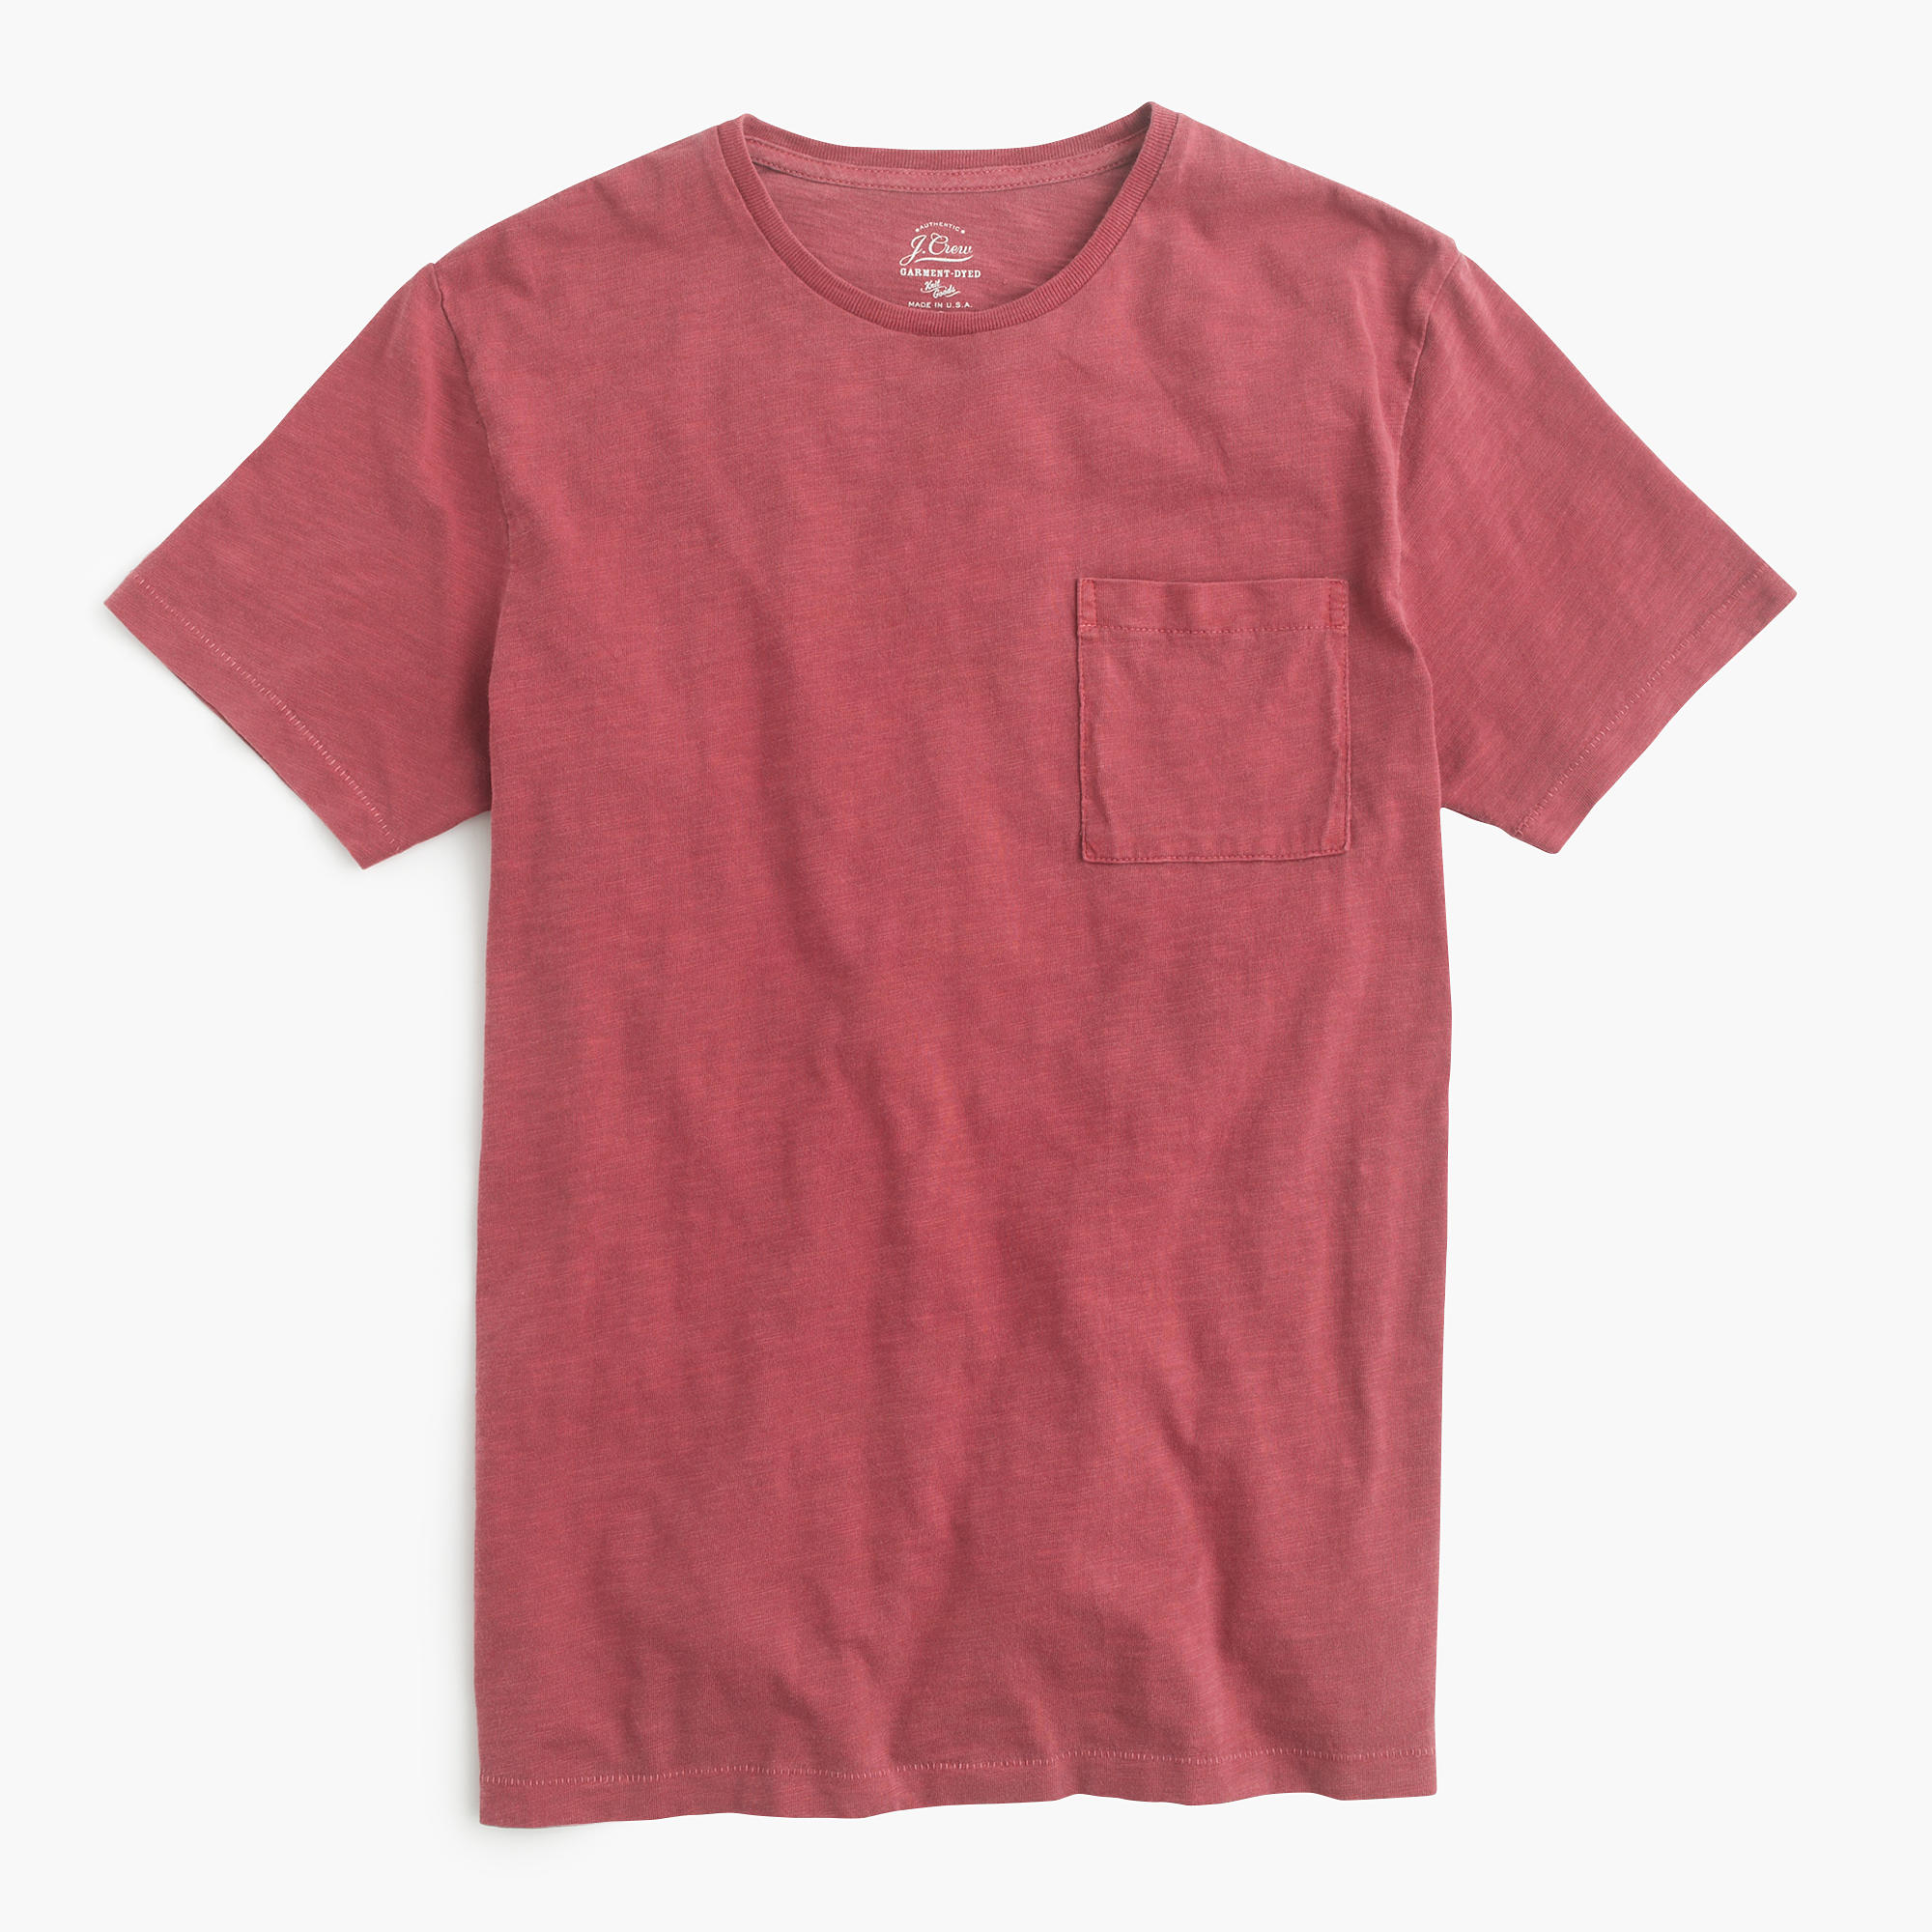 J.crew Garment-dyed T-shirt in Red for Men (danbury red) - Save 23% | Lyst